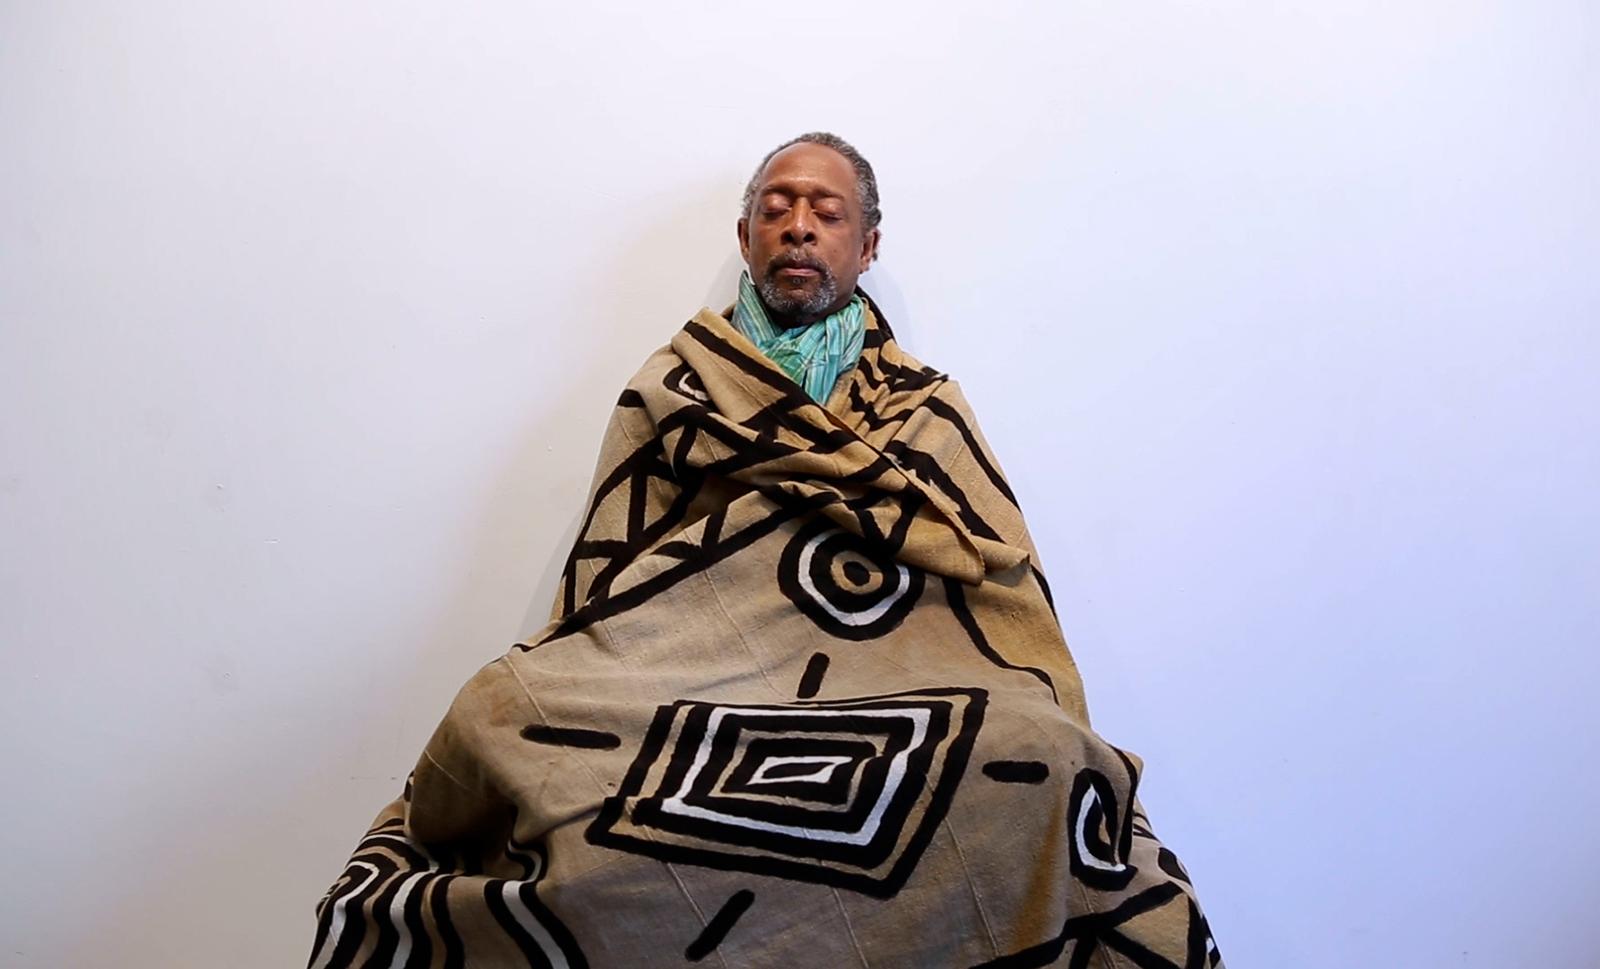 A Black man sitting, wrapped in tan blanket with black and white patterns, wearing a light blue scarf, and with his eyes closed in meditation.